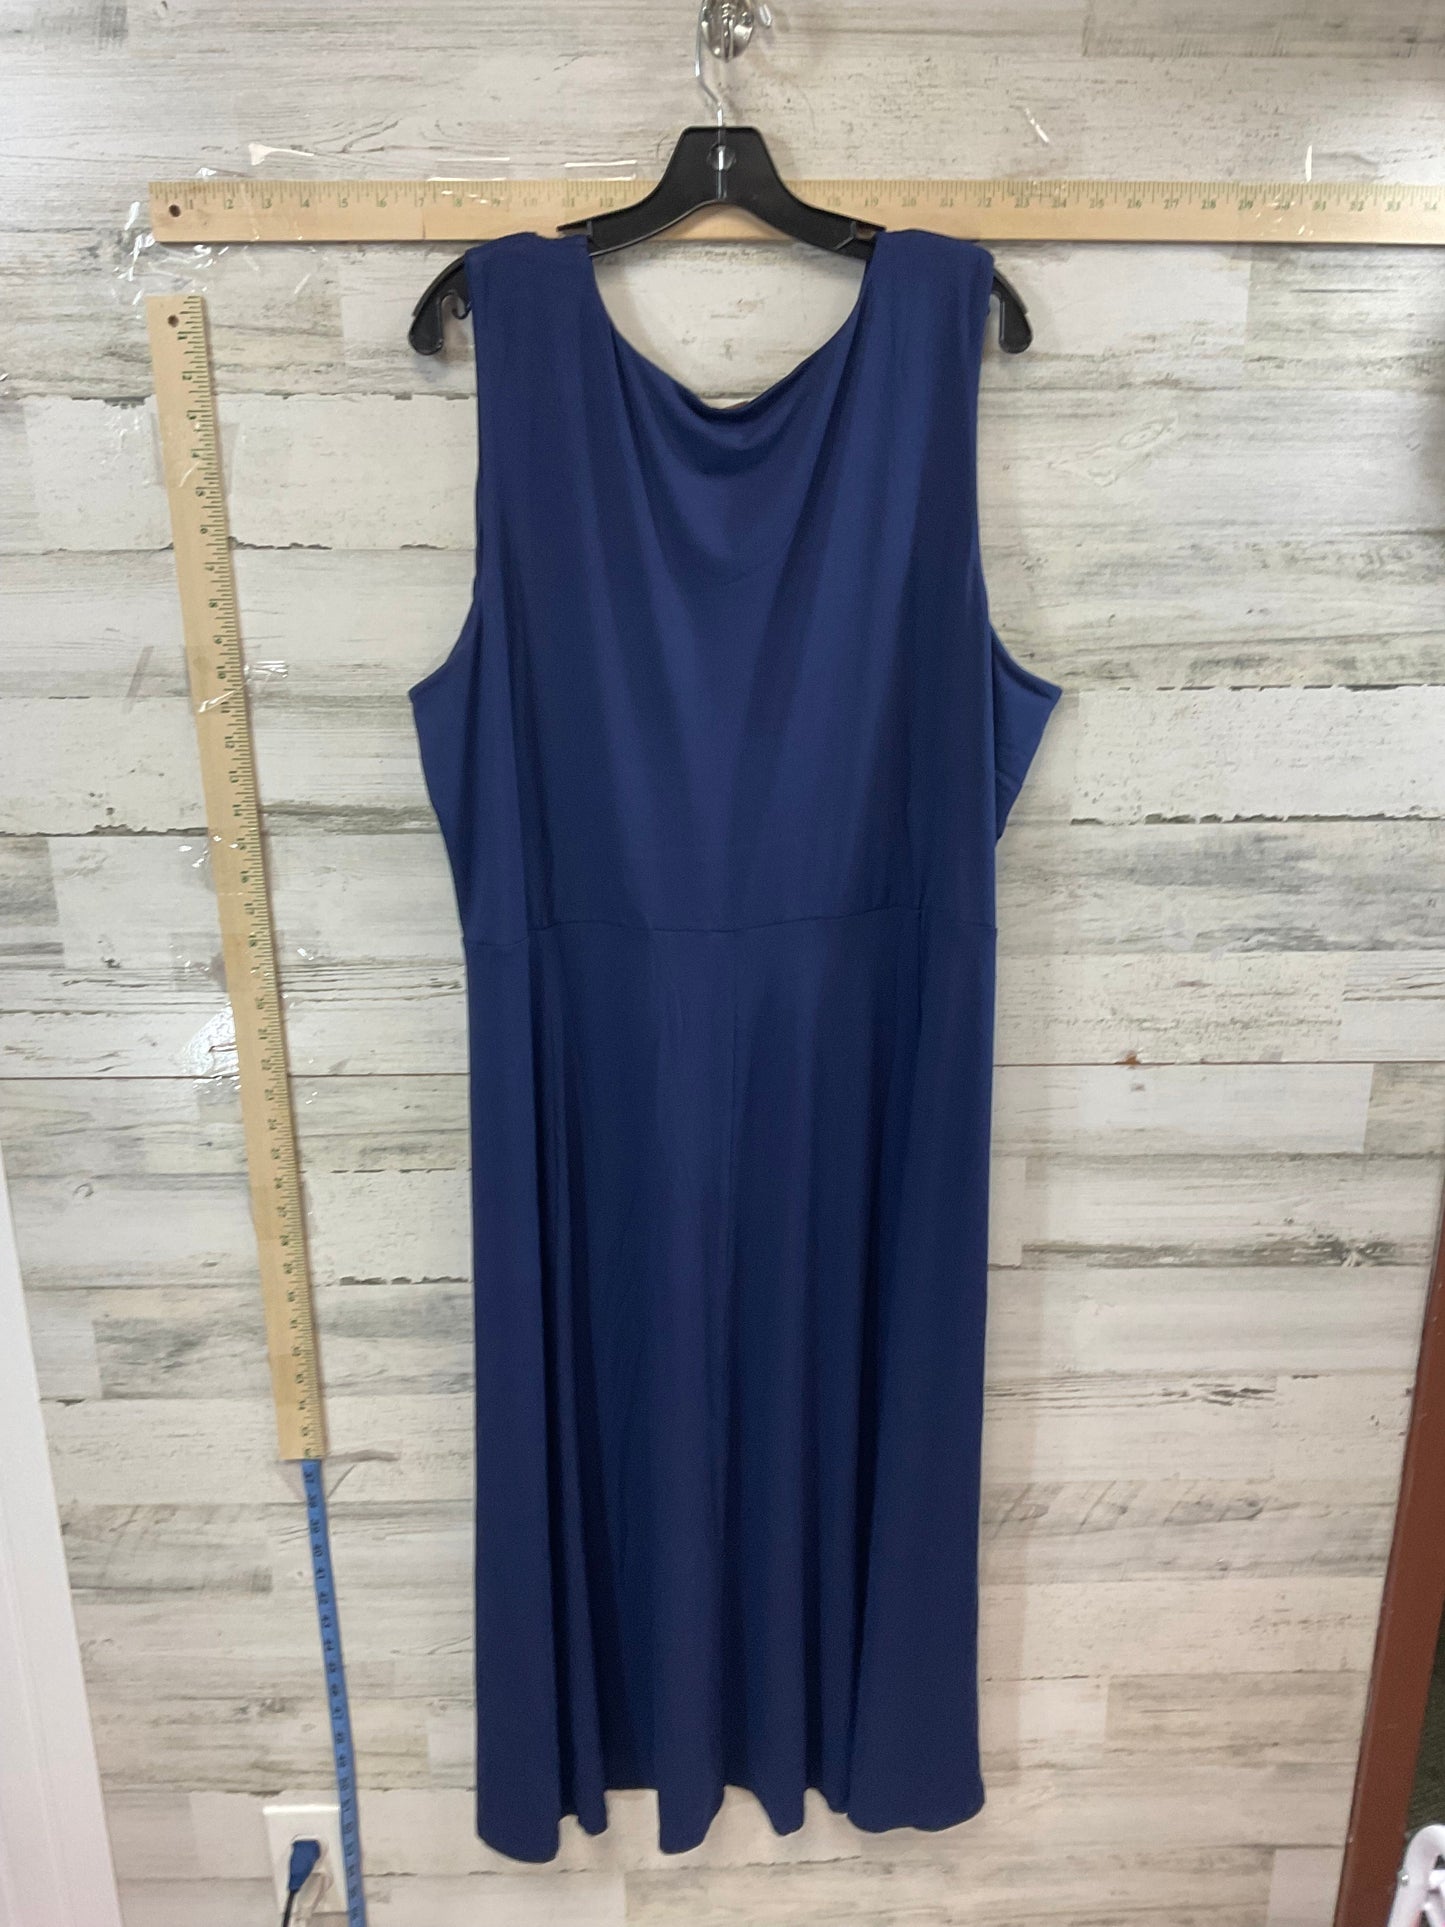 Navy Dress Casual Maxi Coldwater Creek, Size 2x